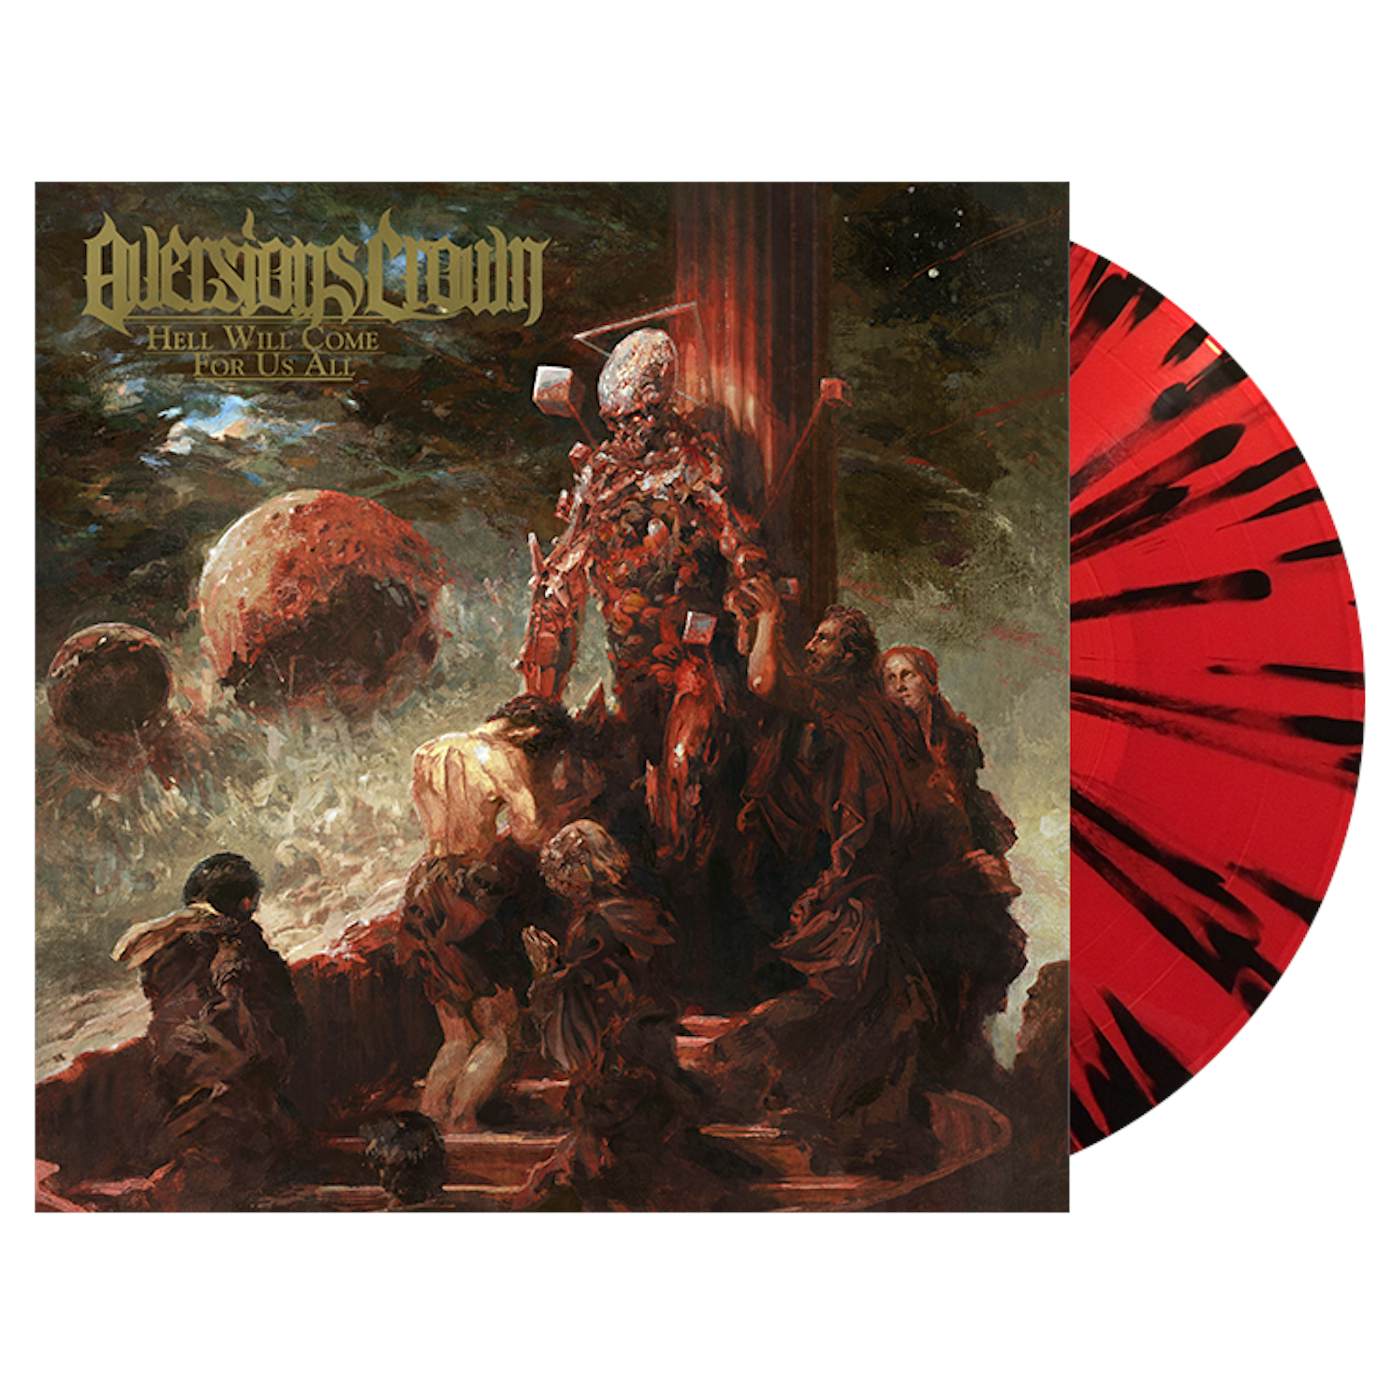 AVERSIONS CROWN - 'Hell Will Come For Us All' Red & Black LP (Vinyl)